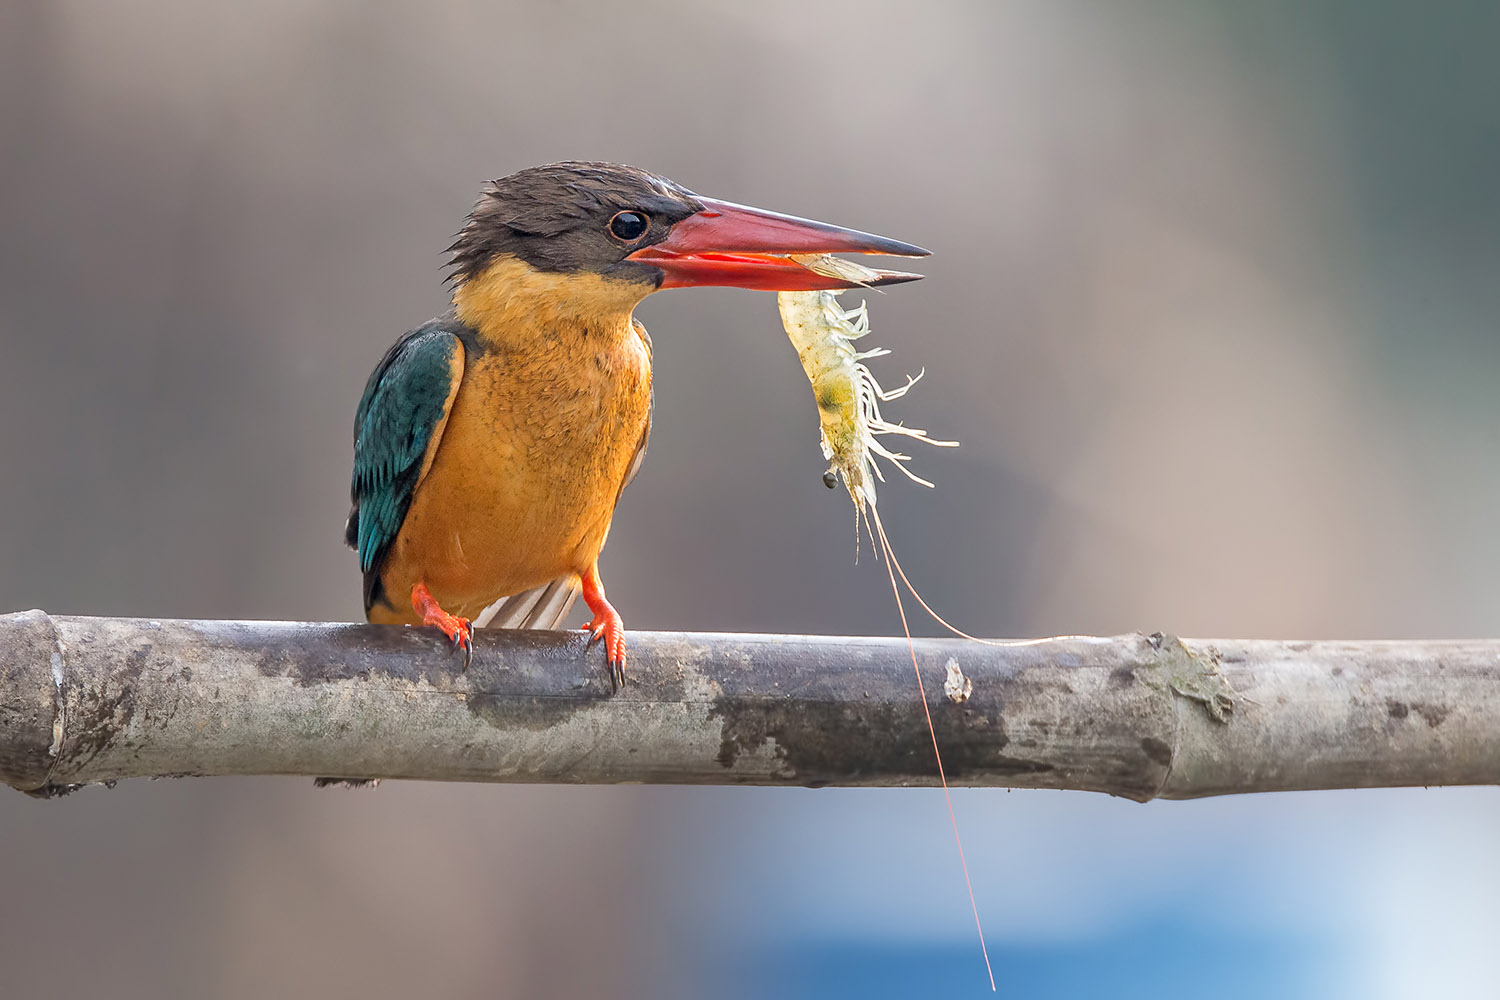 A kingfisher with orange and green feathers holds a shrimp in its beak